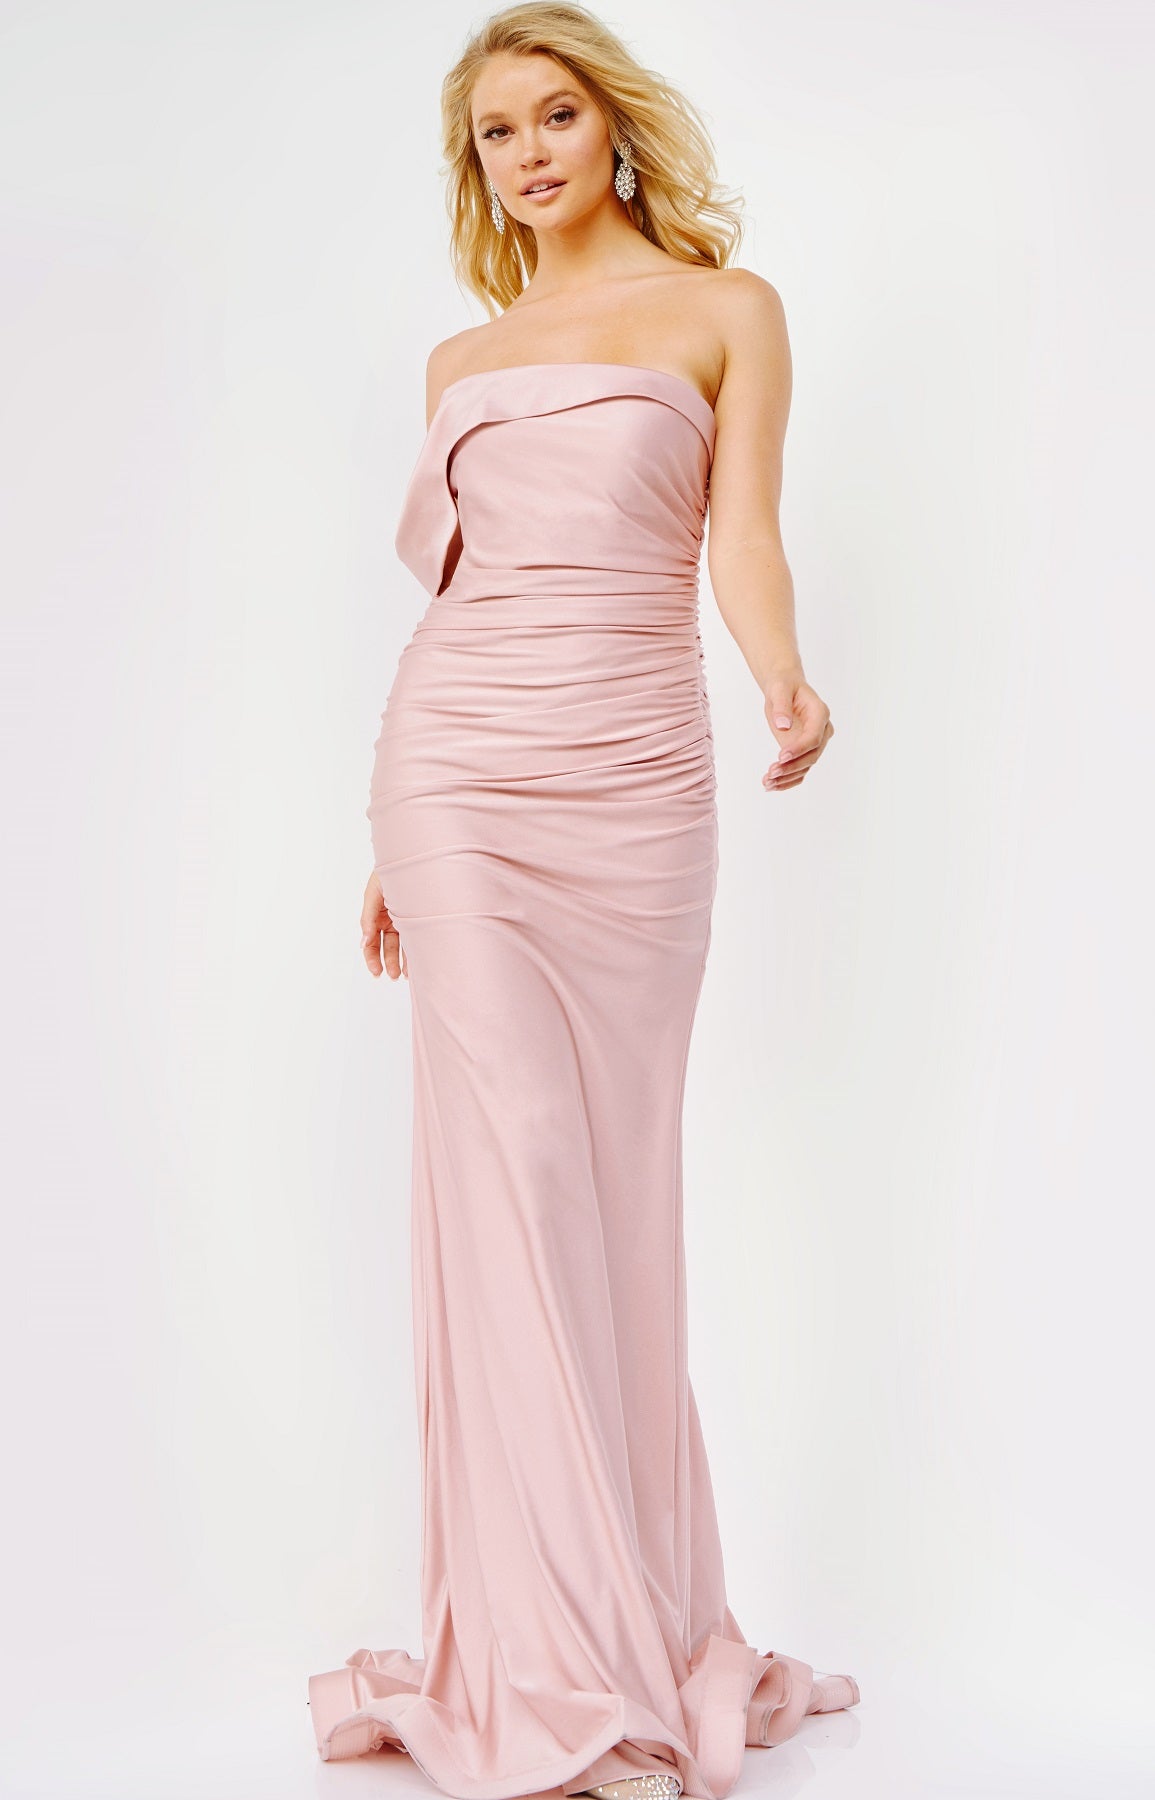 JVN07640 This a JVN by Jovani Prom Dress features a beautiful ruched fit and flare silhouette with an asymmetrical neckline and one right side off the shoulder strap. A good choice for any formal event or bridesmaids. Blush